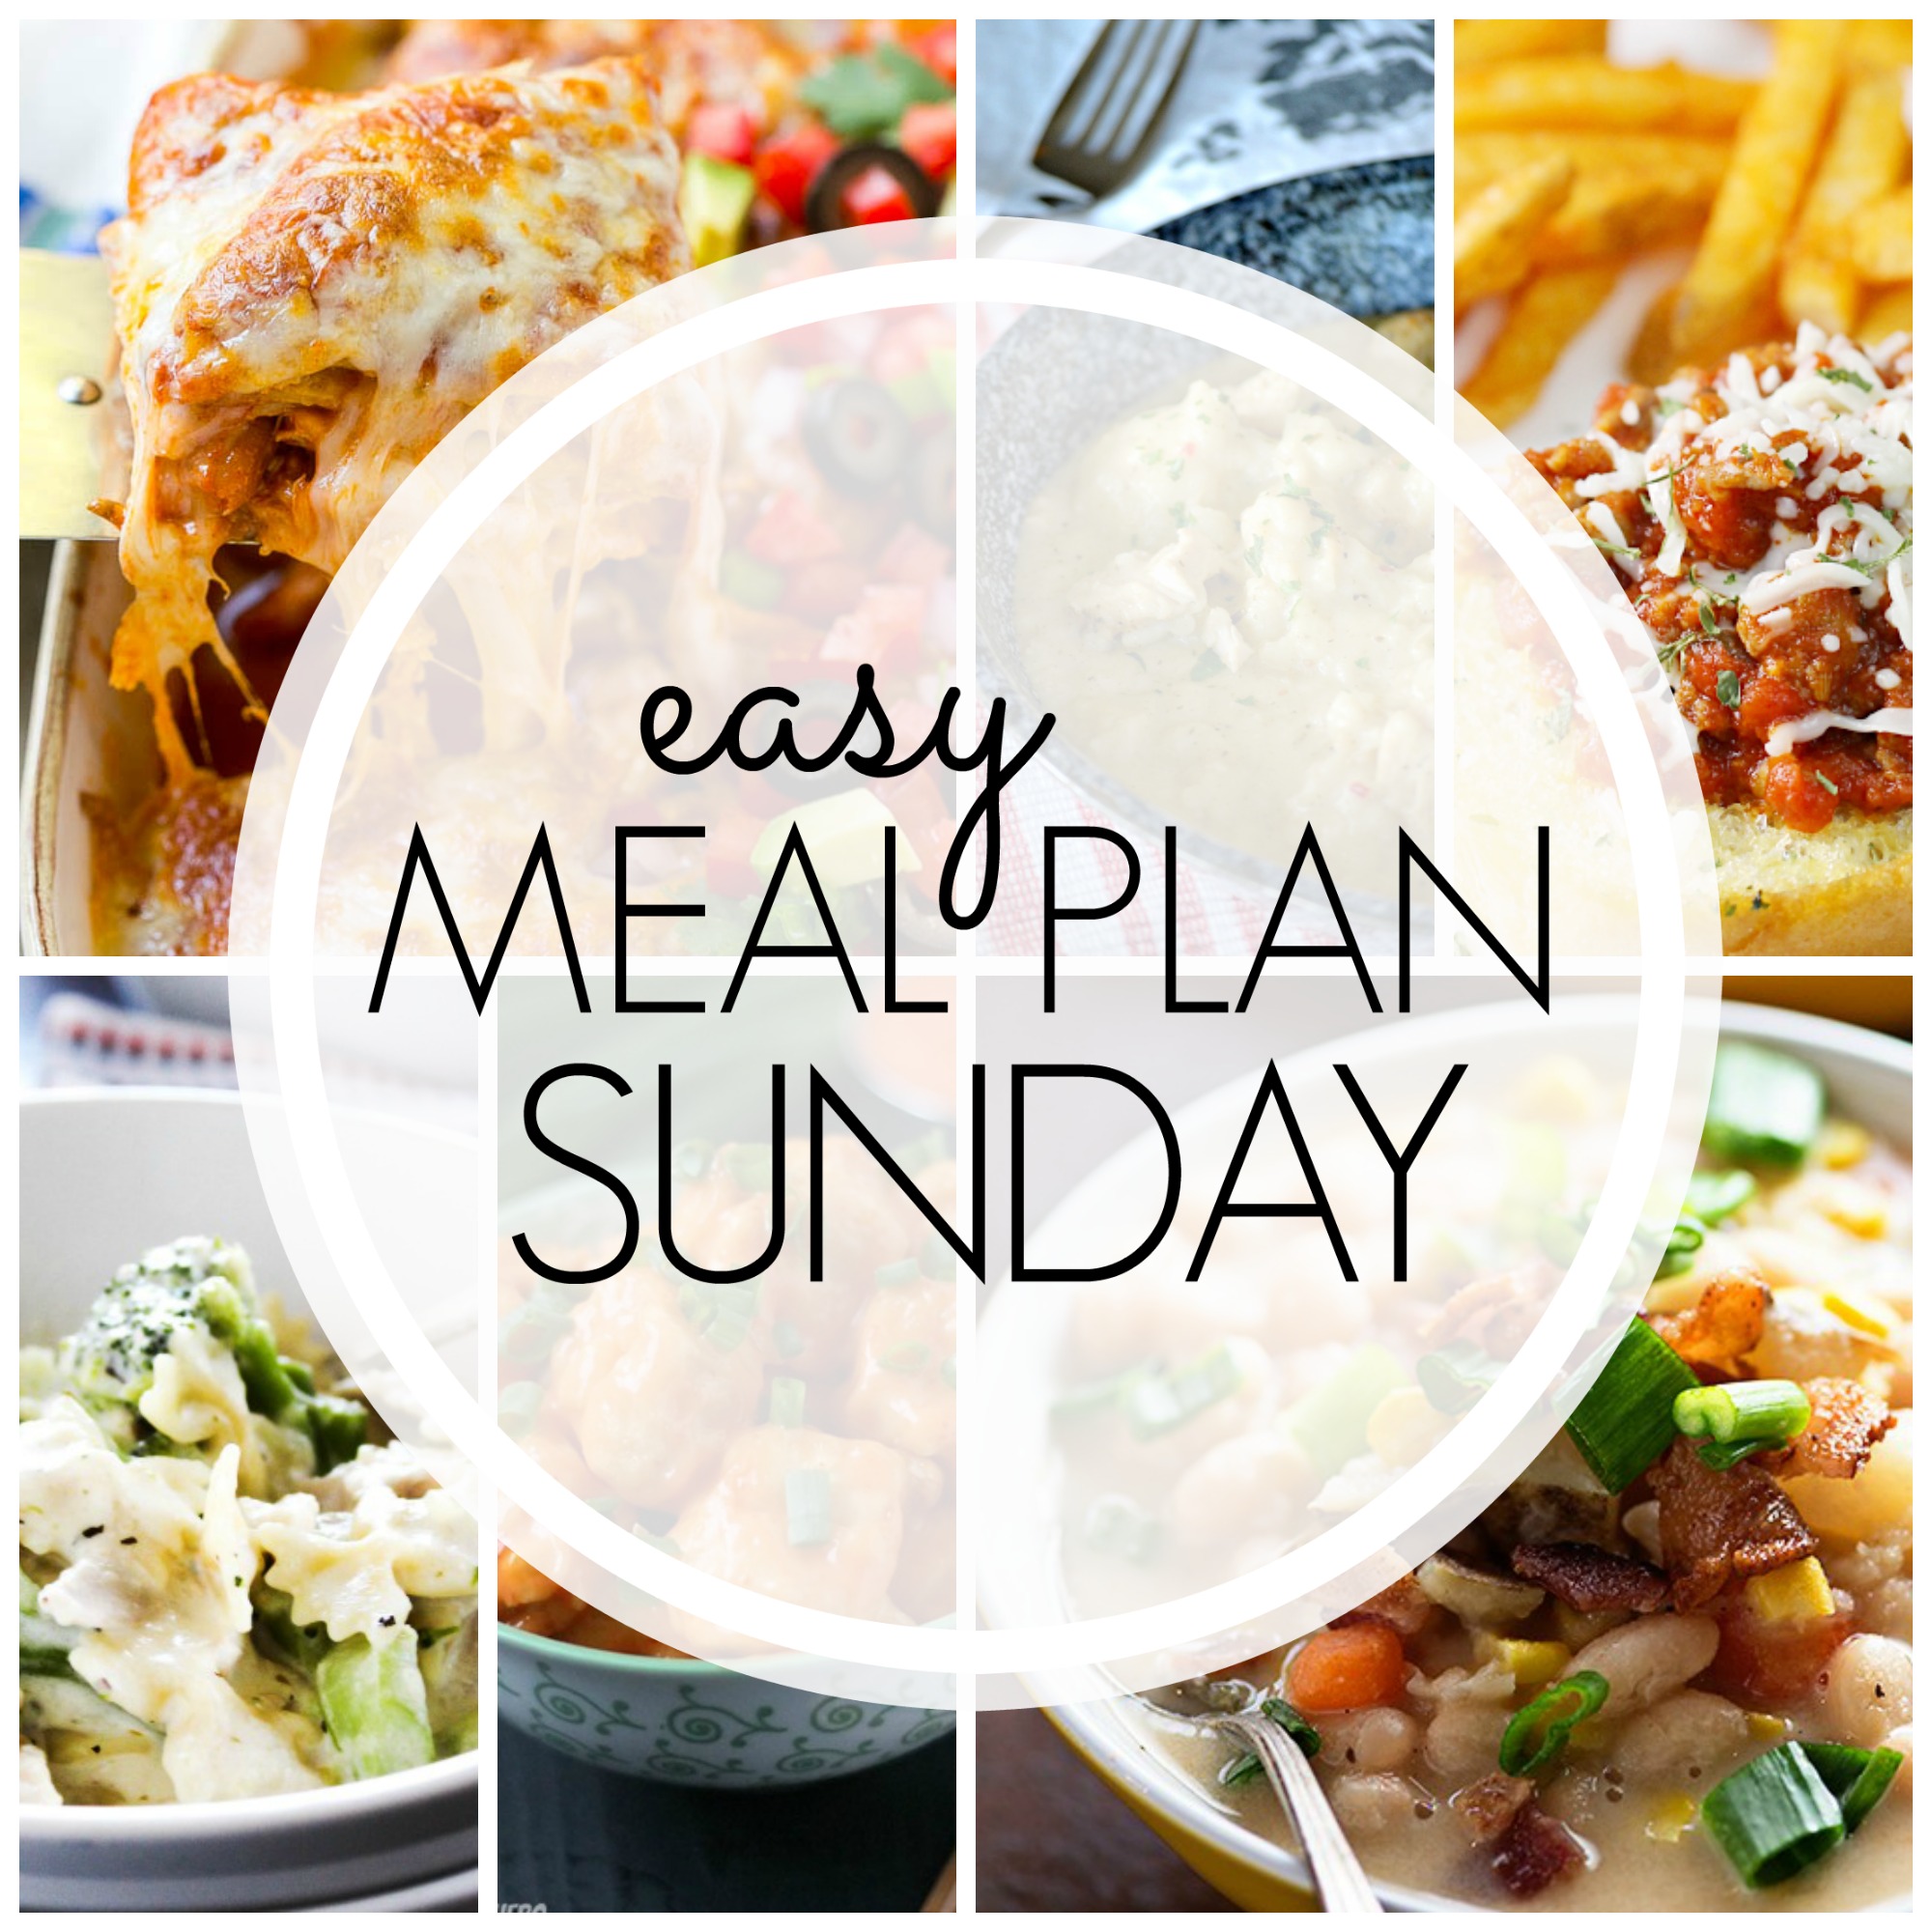 Easy Meal Plan Sunday #75